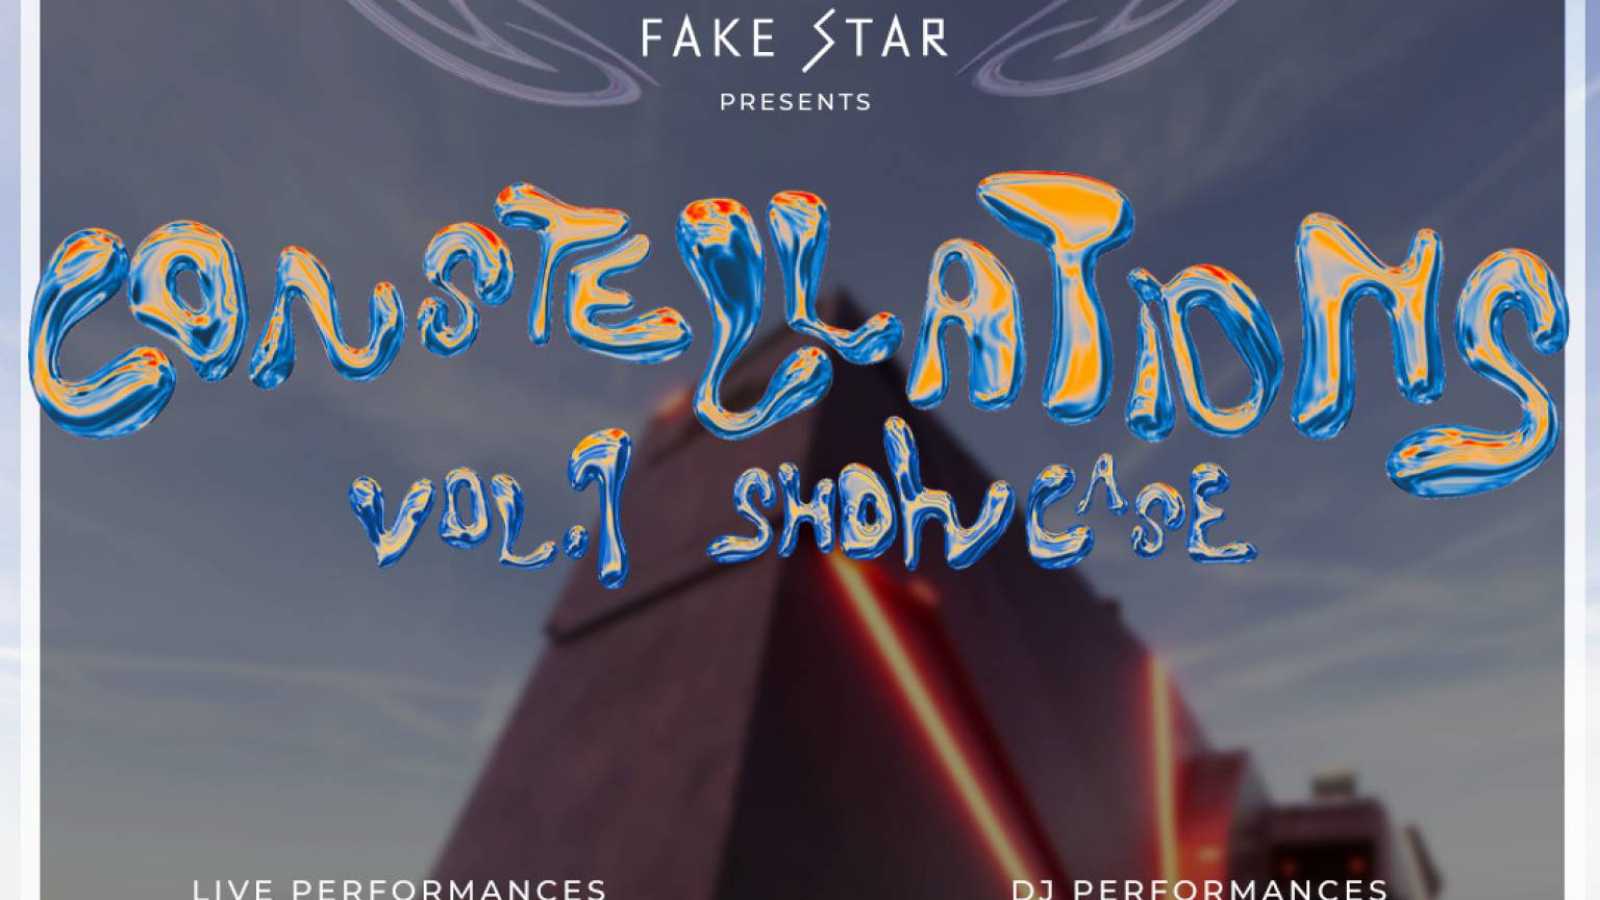 FAKE STAR to Present "Constellations" Showcase Concert Series